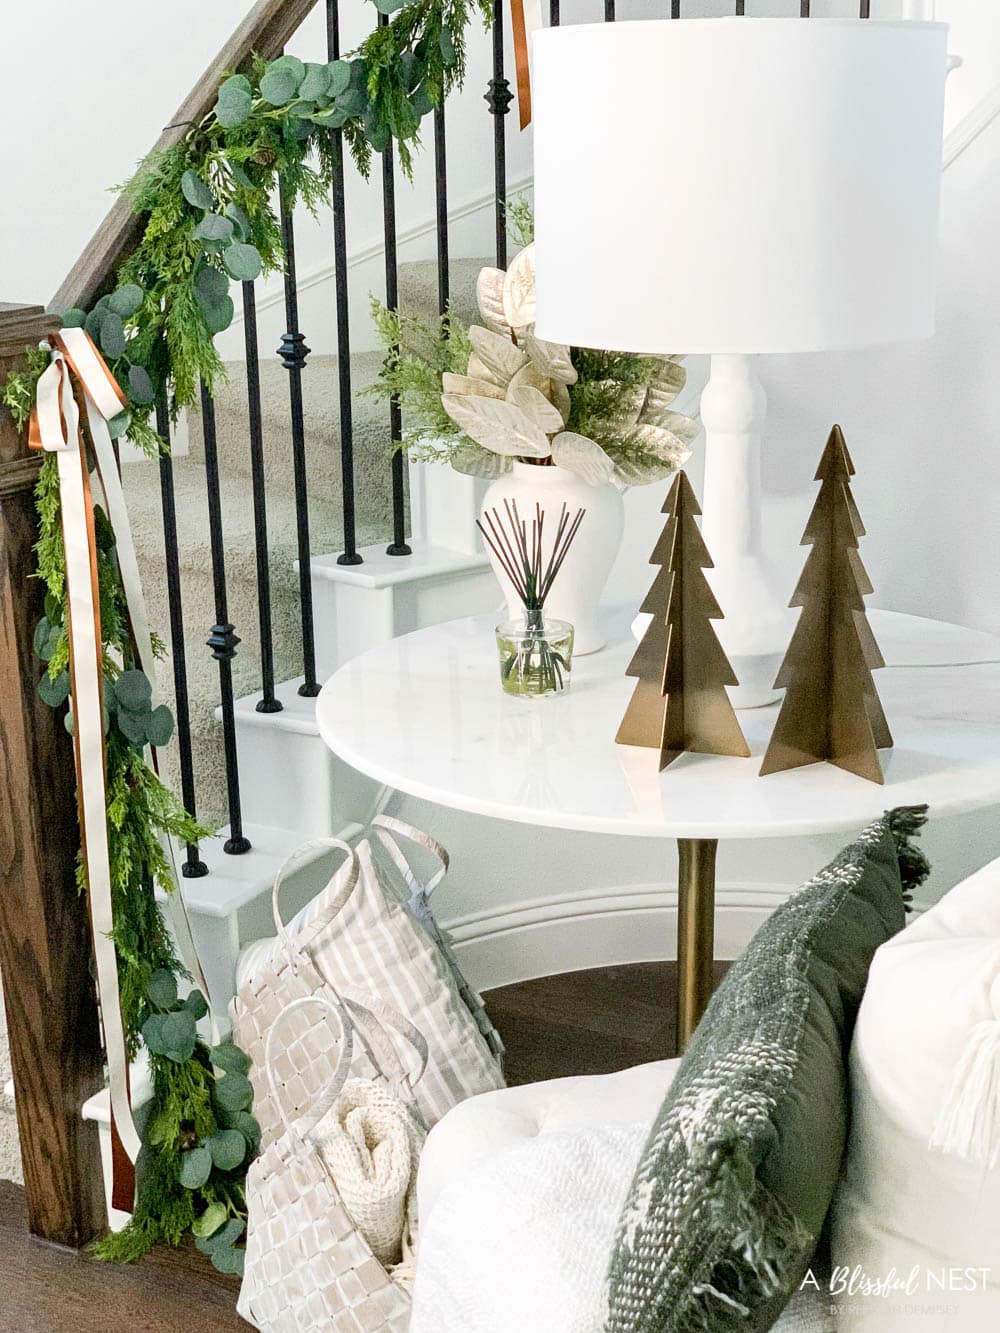 Christmas decor with pillows, baskets, metal trees, and garland on the stairway.